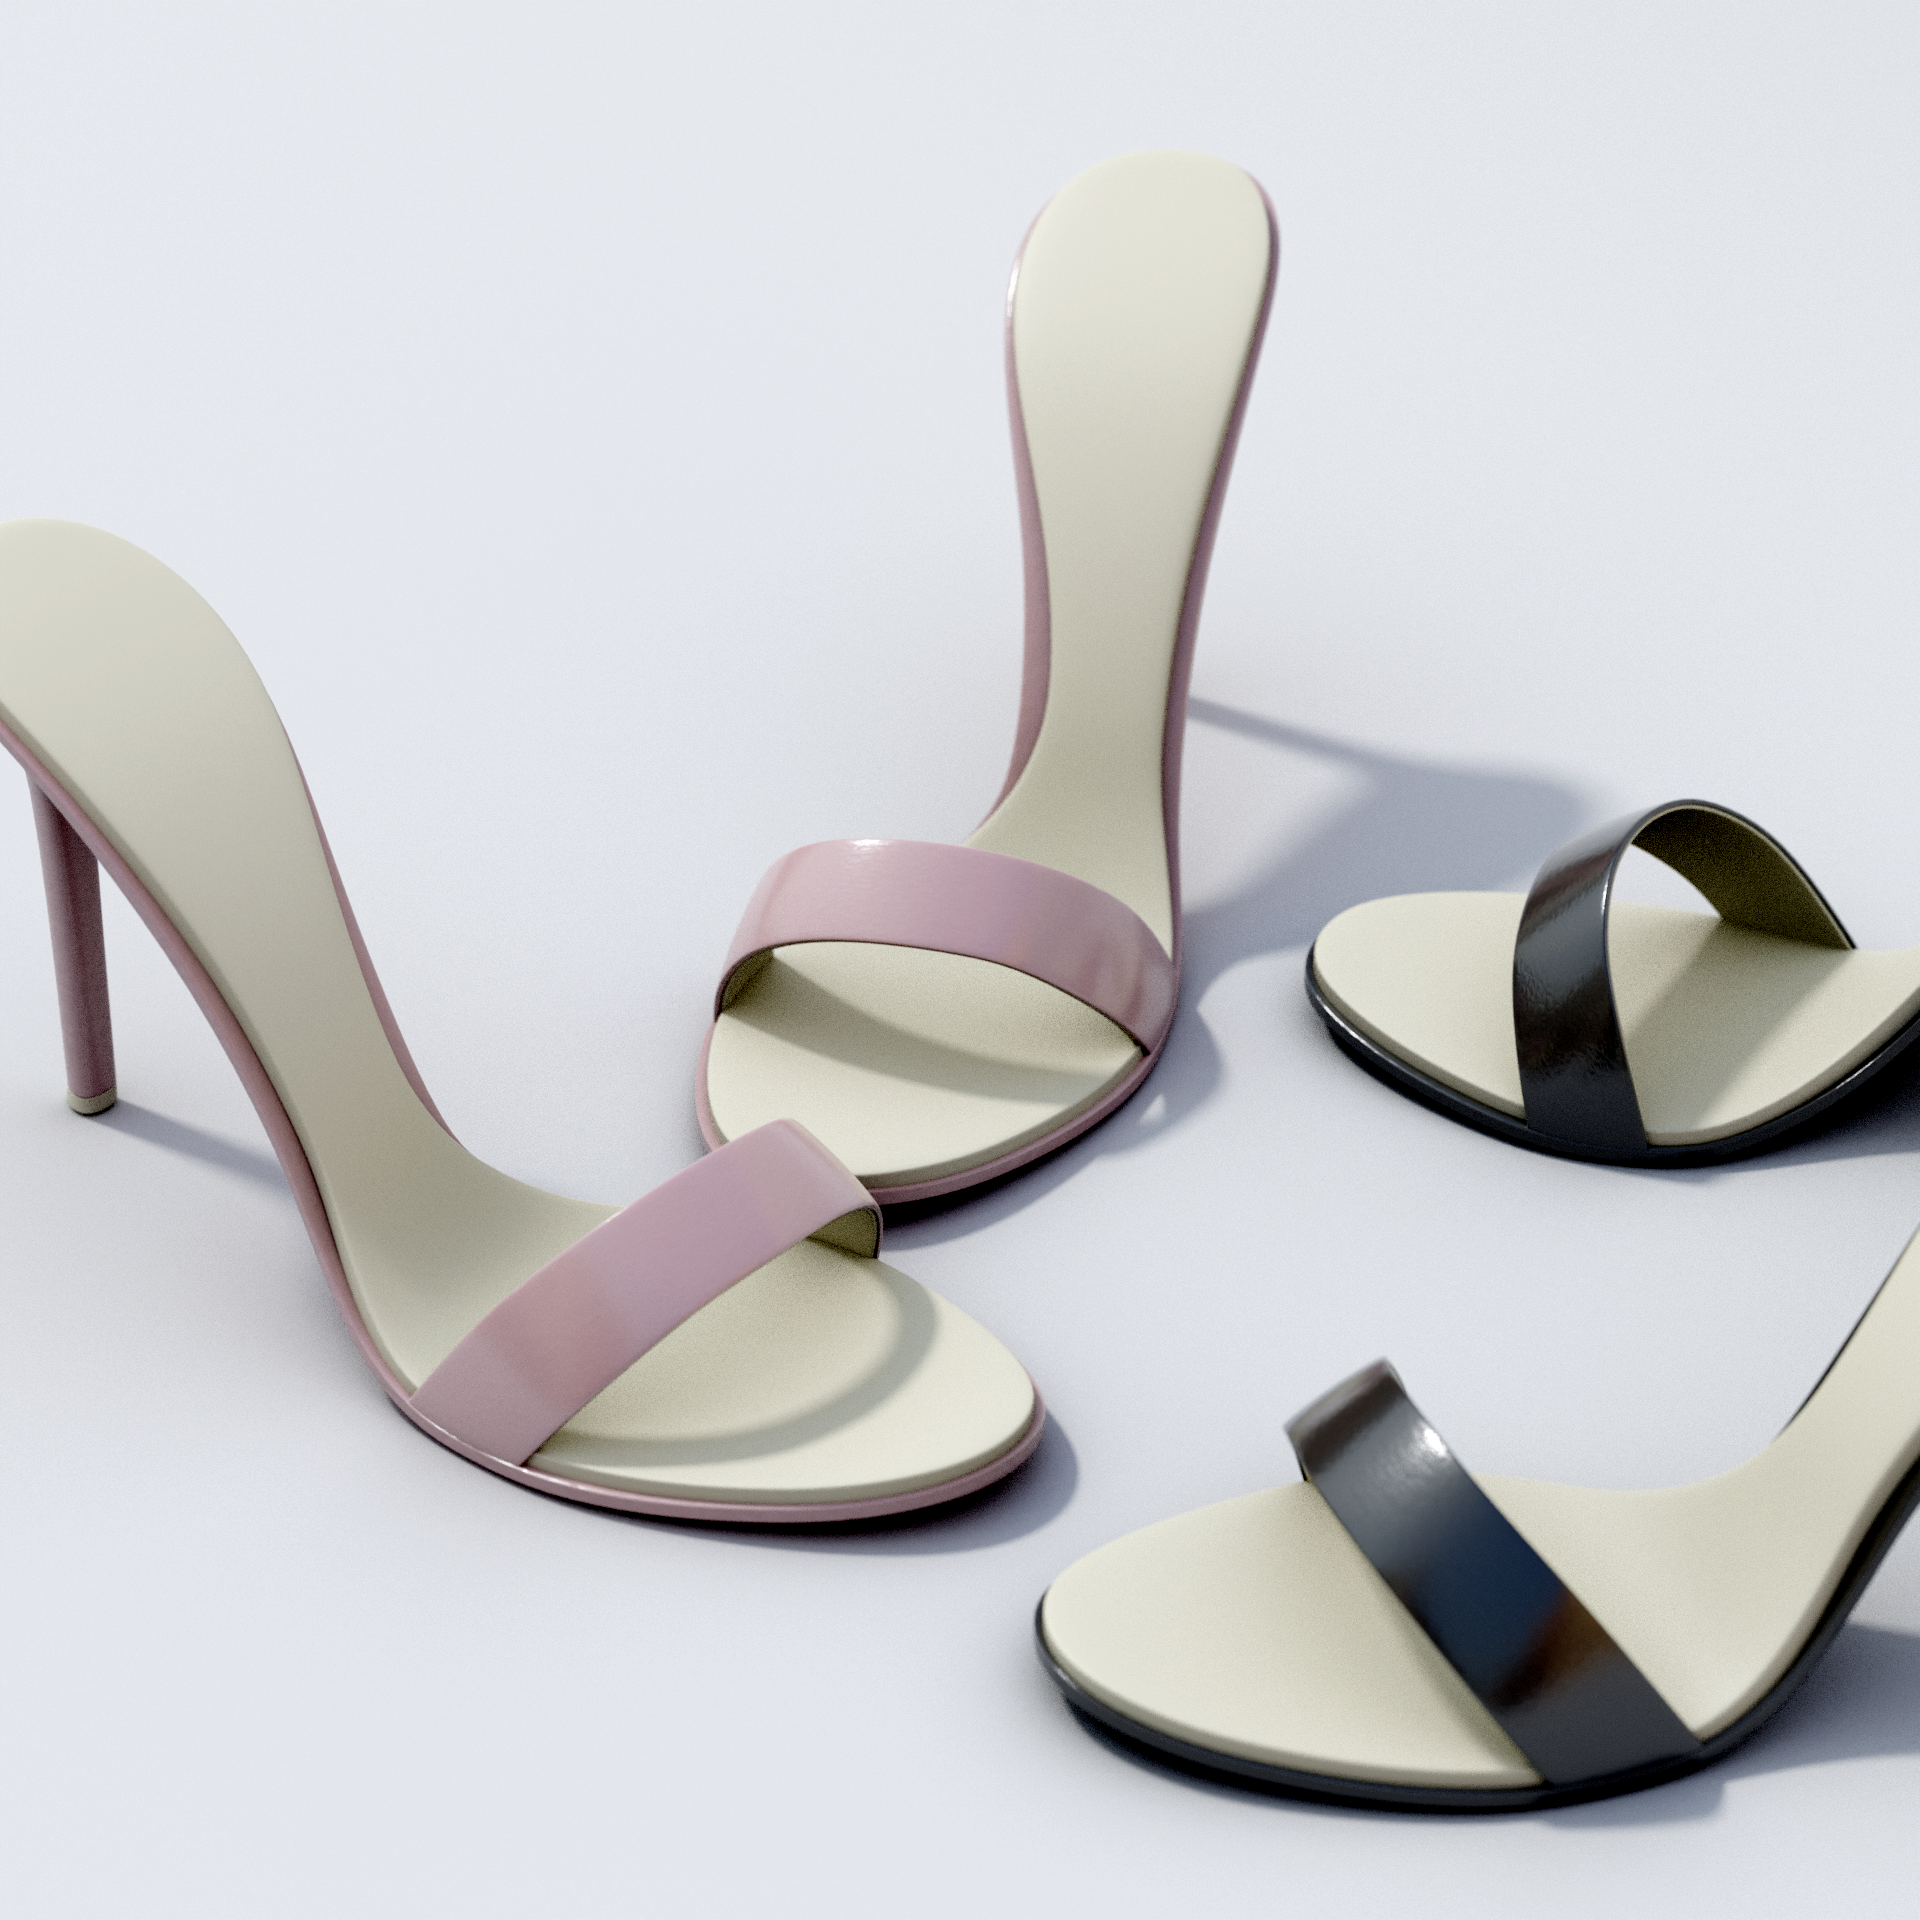 Female High Heel Sandals preview image 1